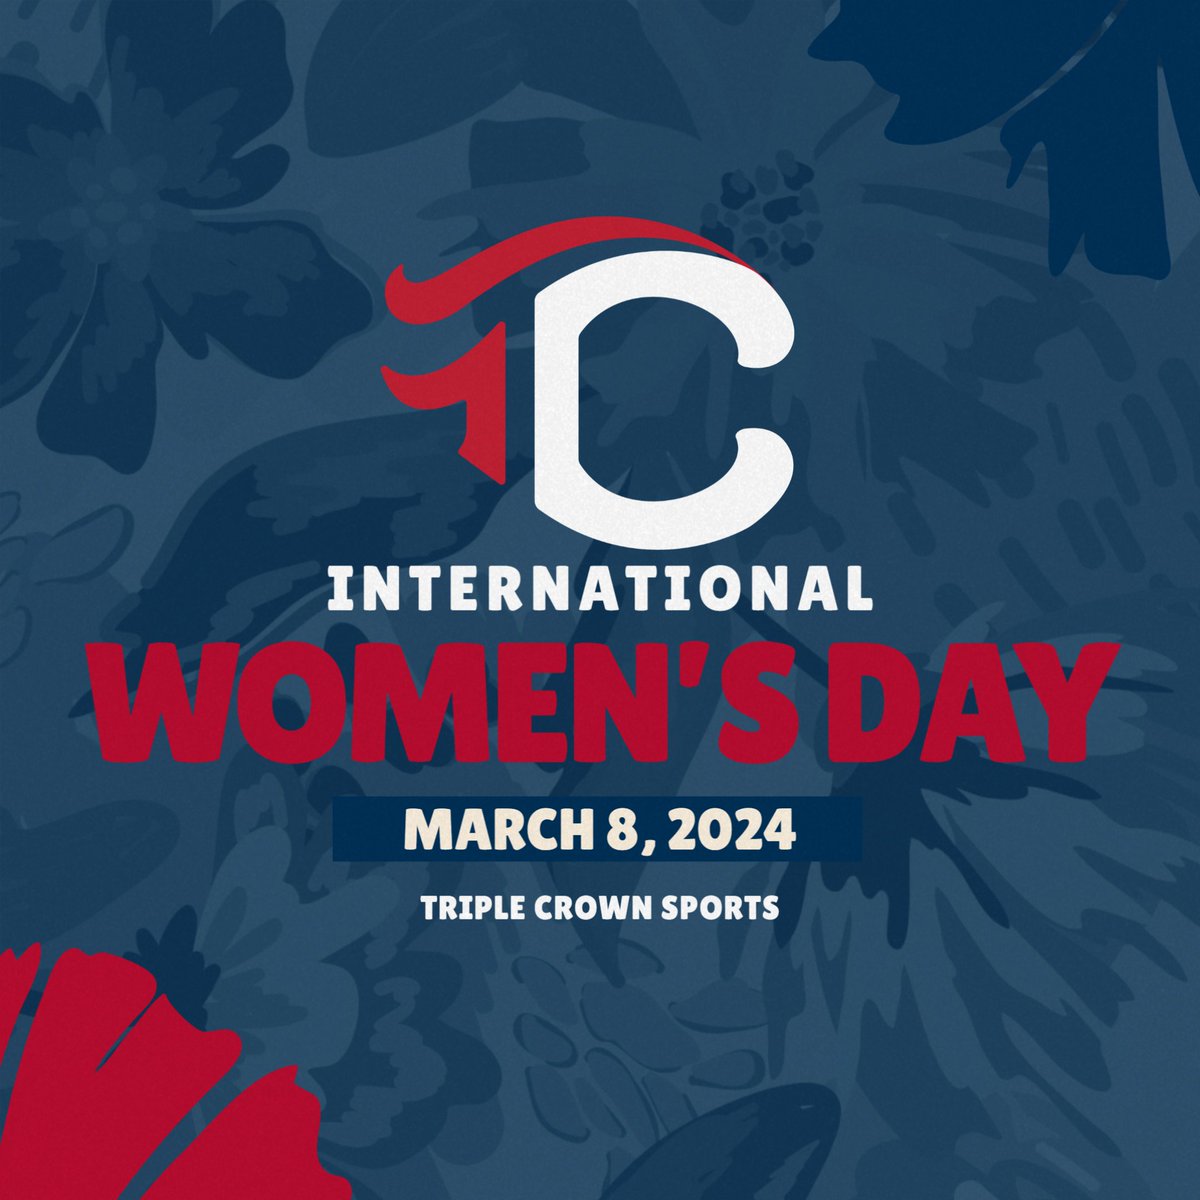 'Don't think about making women fit the world -- think about making the world fit women.' - Gloria Steinem #InspireInclusion #IWD2024 #IPlayTCS